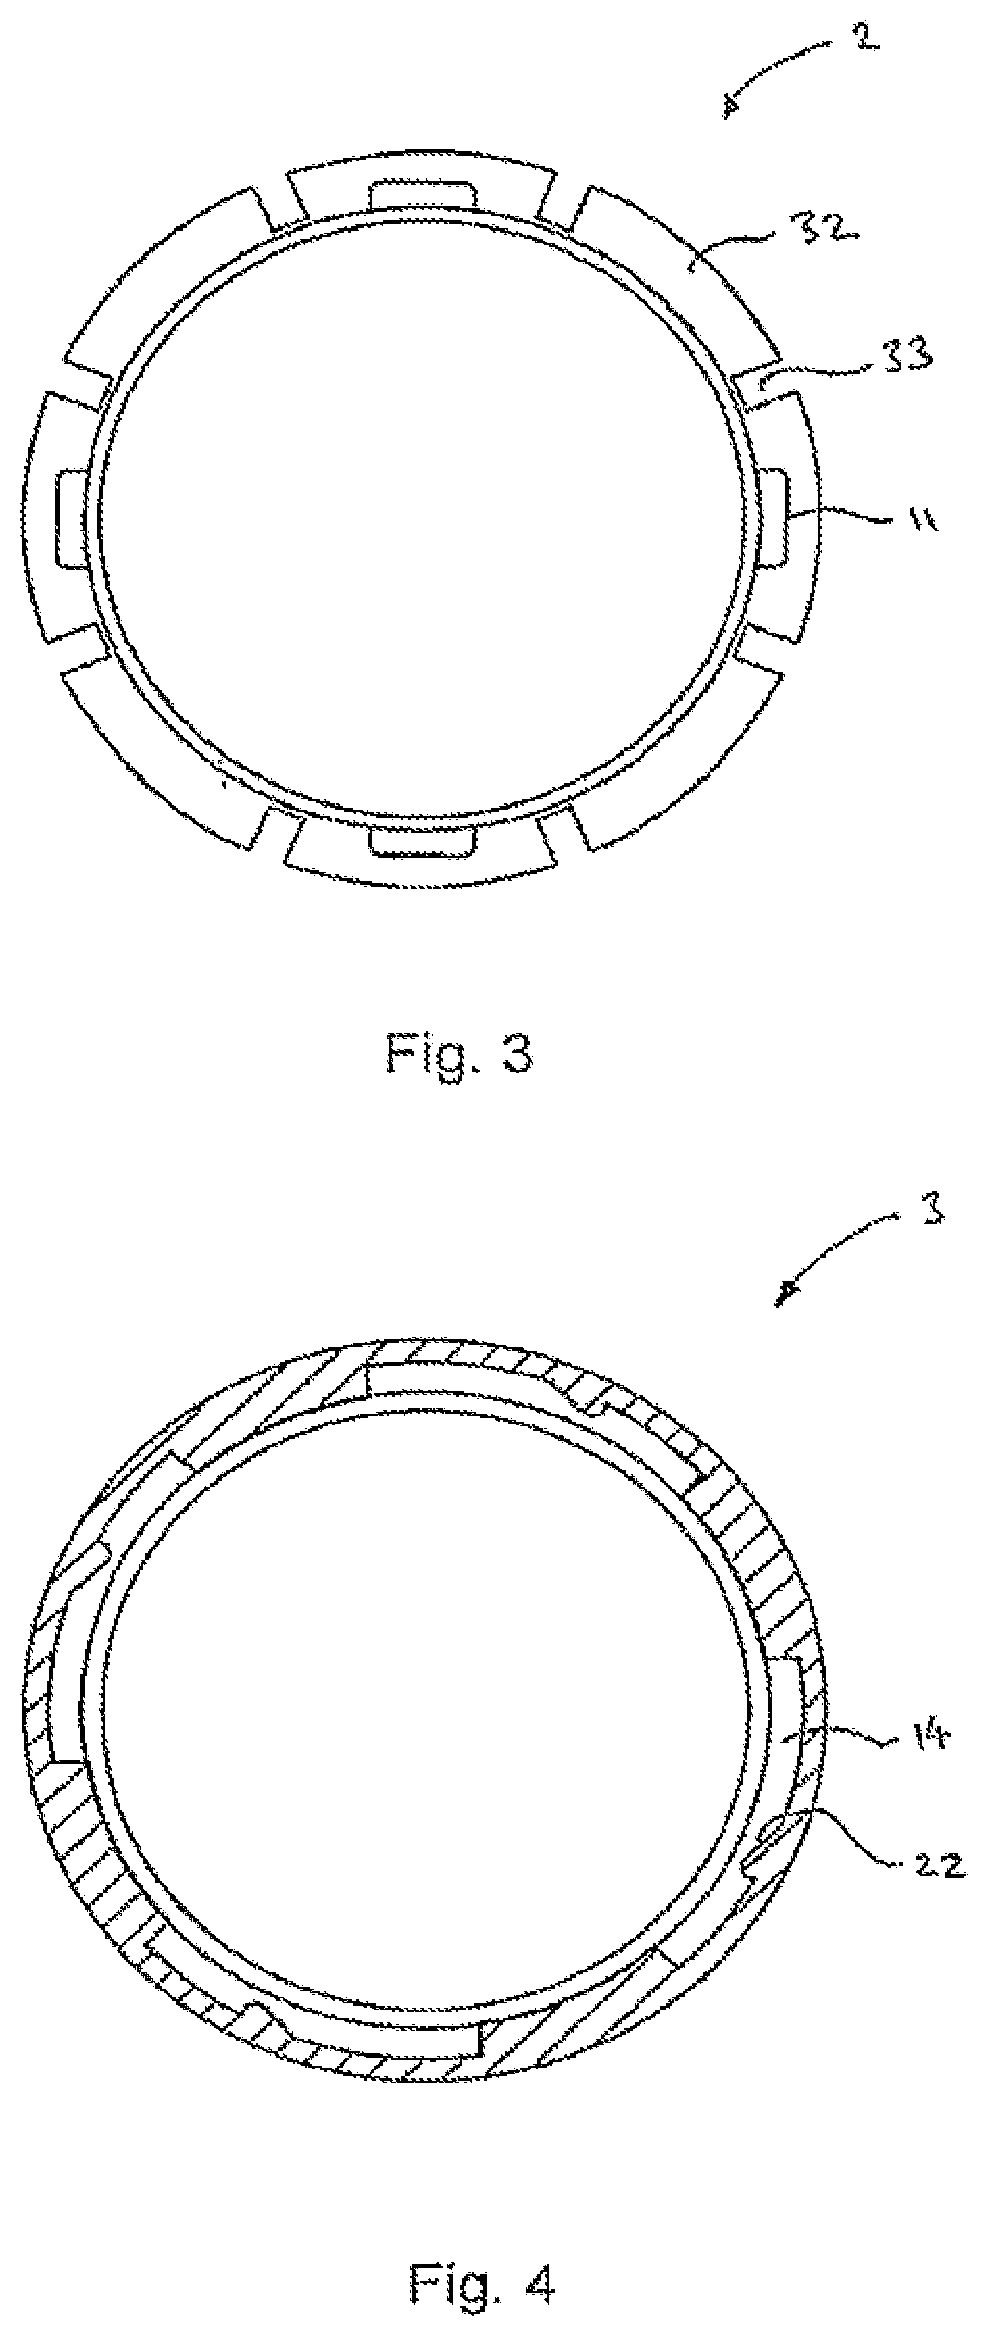 System and method of releasably connecting pipe sections